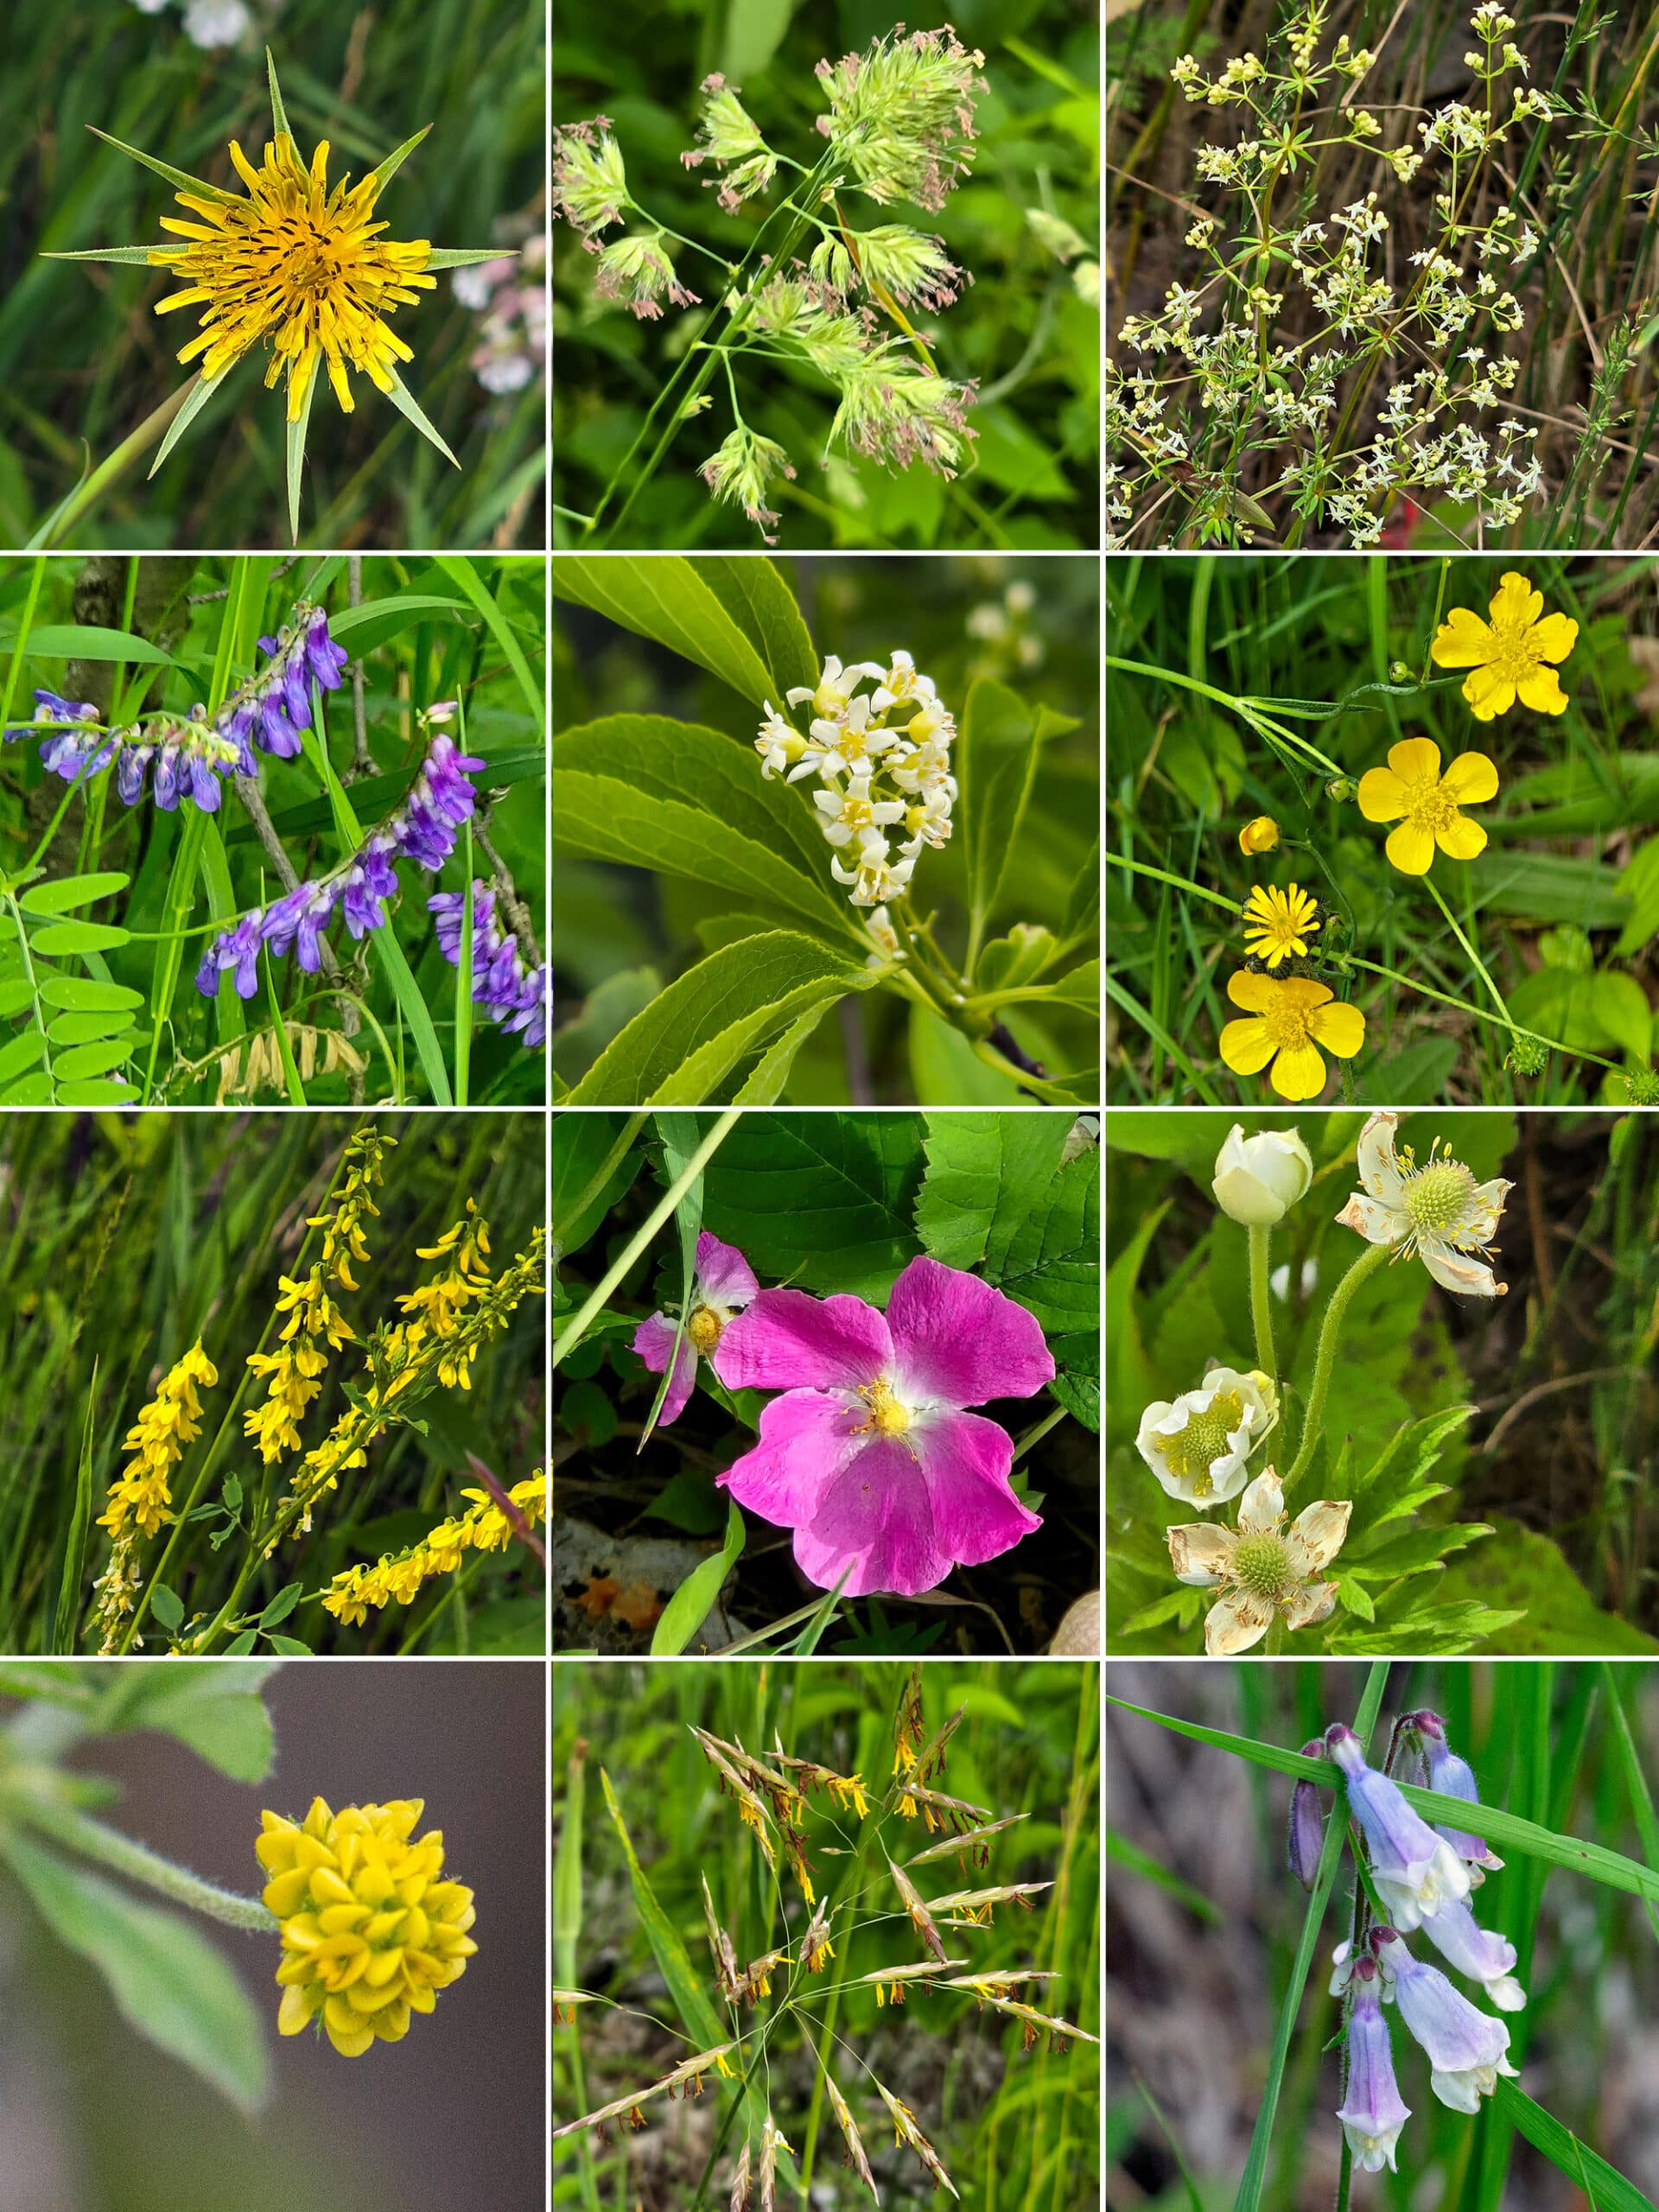 12 part image showing various wildflowers seen along the kawartha trail.